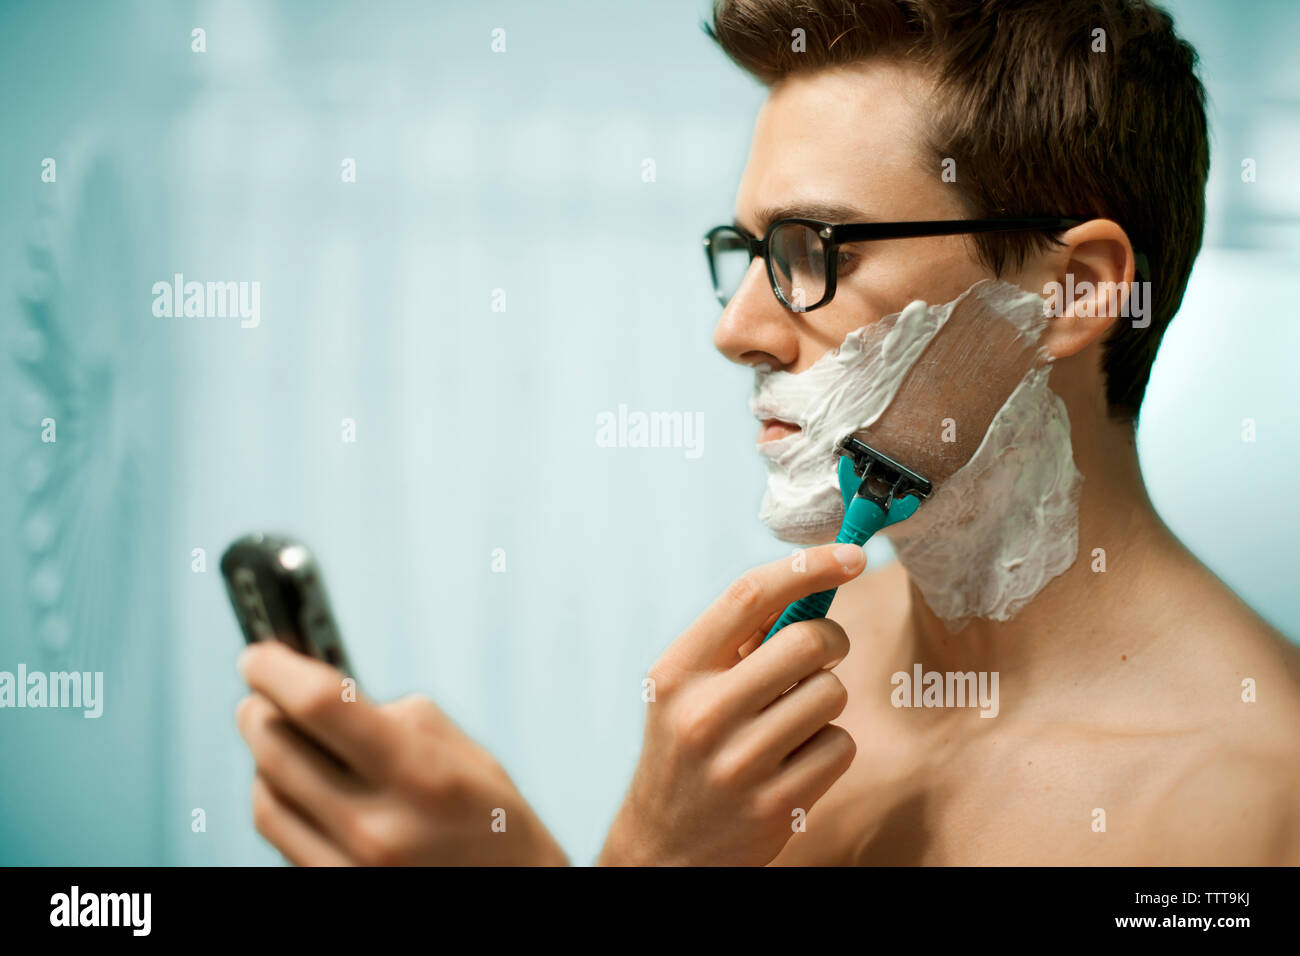 Man using phone while shaving face at home Stock Photo